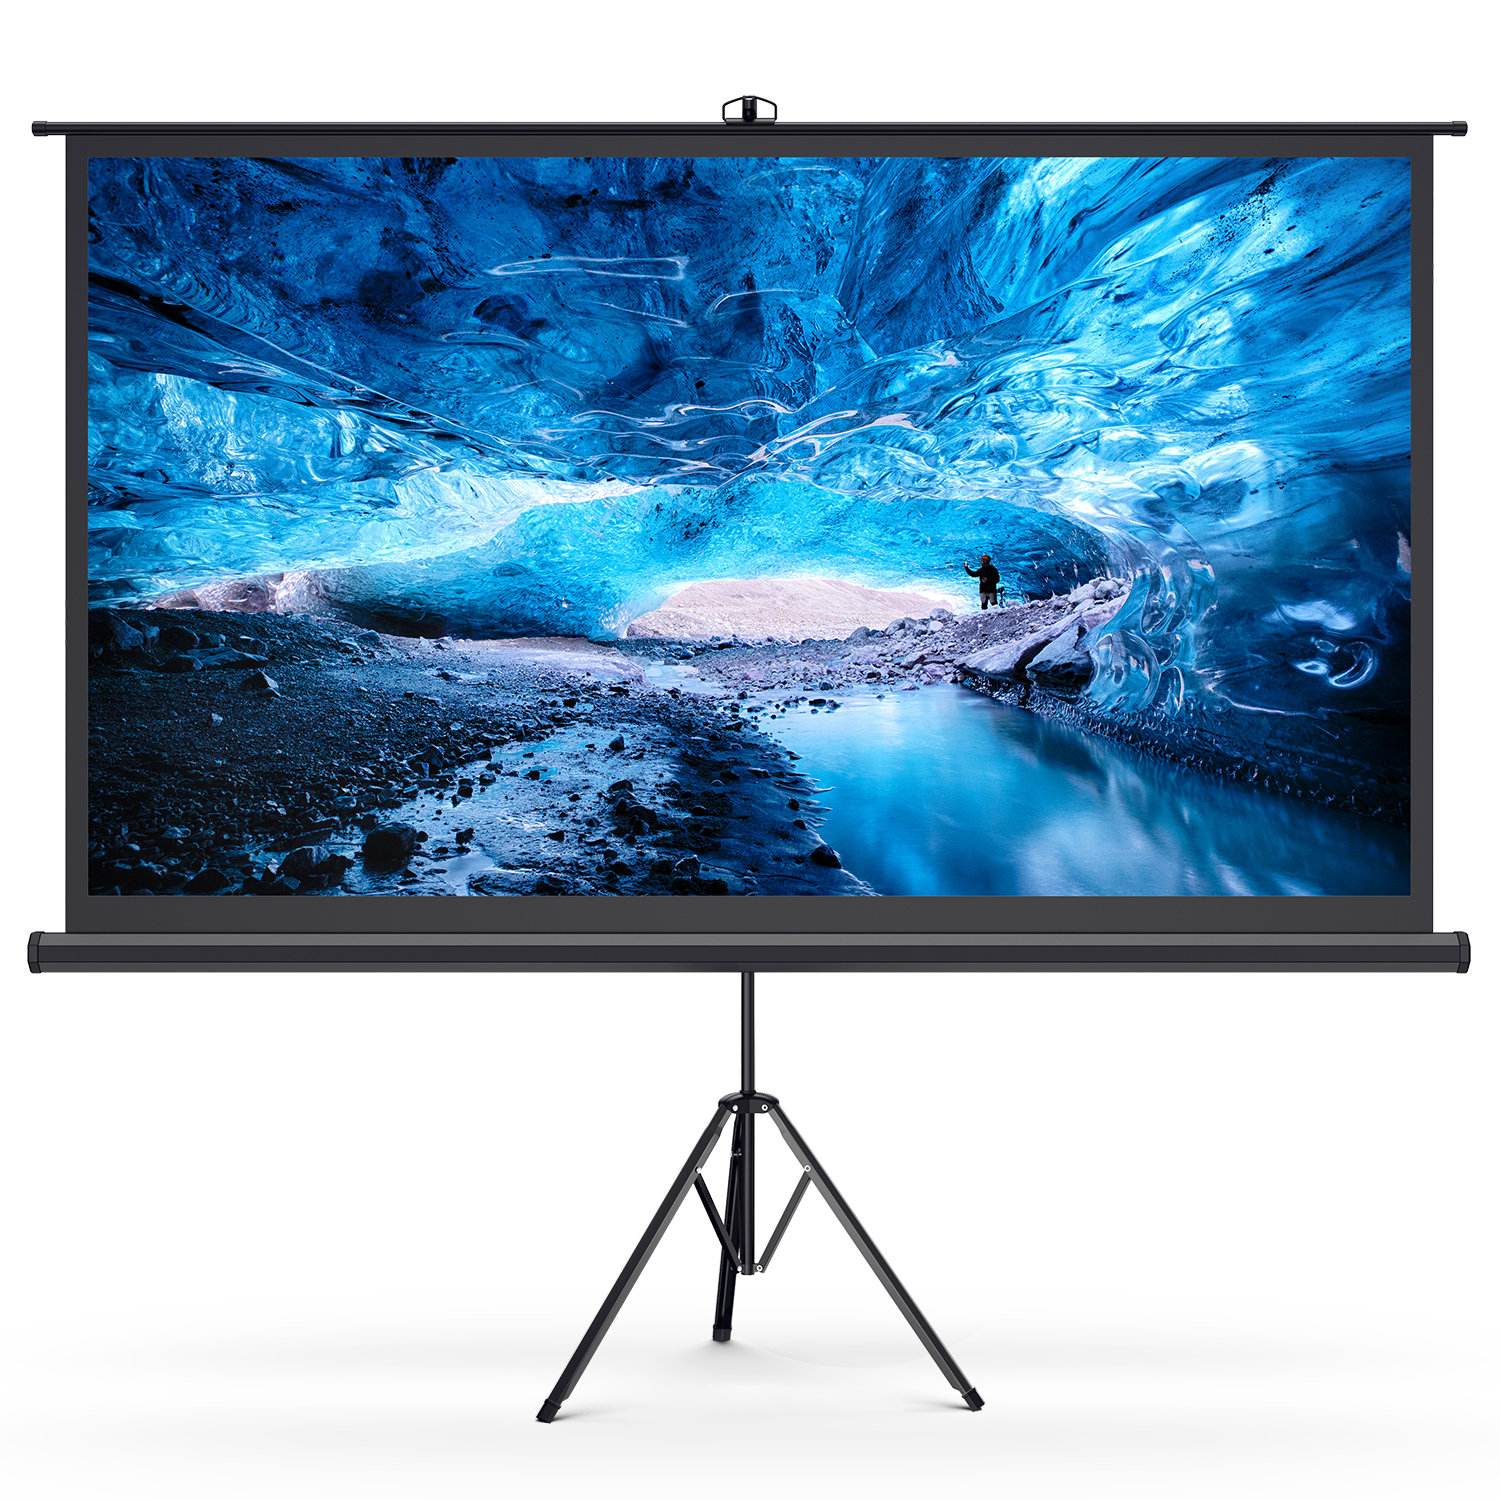 Bomaker Projector Screen Ideal for Home Theater Outdoor Indoor Support Double Sided Projection 100 inch Projection Screen 16:9 HD Foldable Anti-Crease Portable Washable Projector Screen 